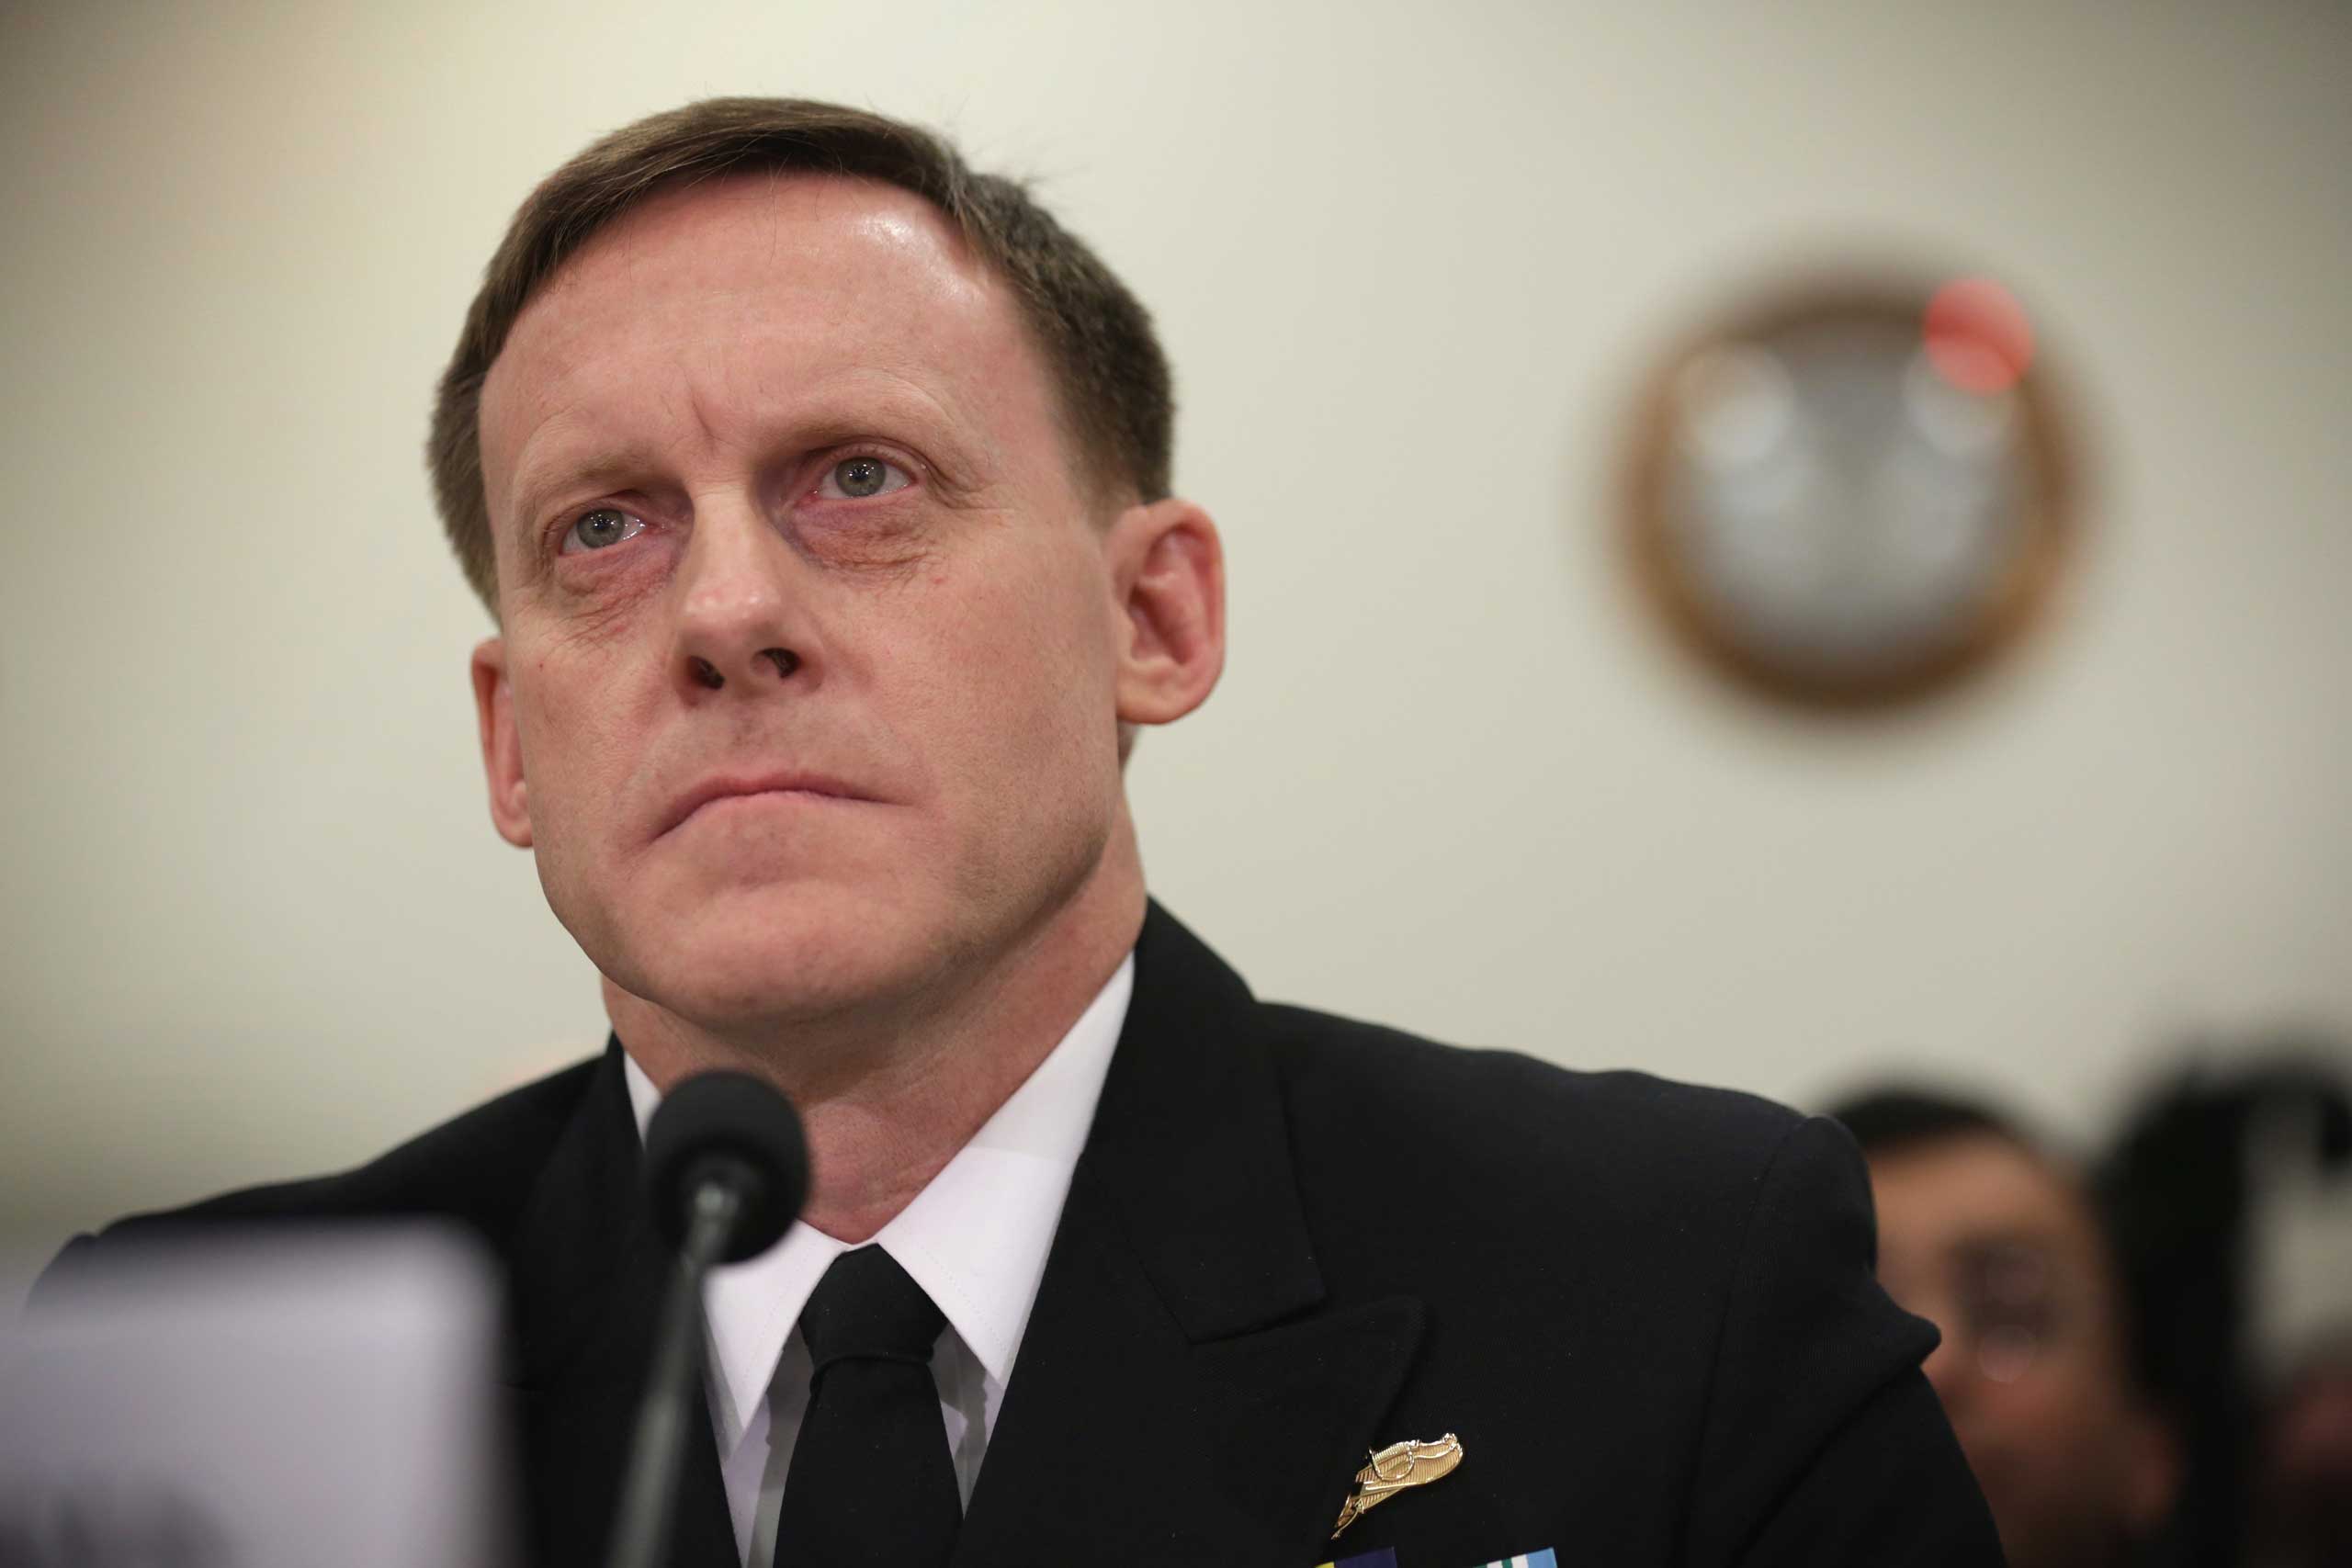 Adm. Michael Rogers, commander of the U.S. Cyber Command and director of the National Security Agency, testifies during a hearing before the House (Select) Intelligence Committee Nov. 20, 2014 on Capitol Hill in Washington, DC. (Alex Wong—Getty Images)